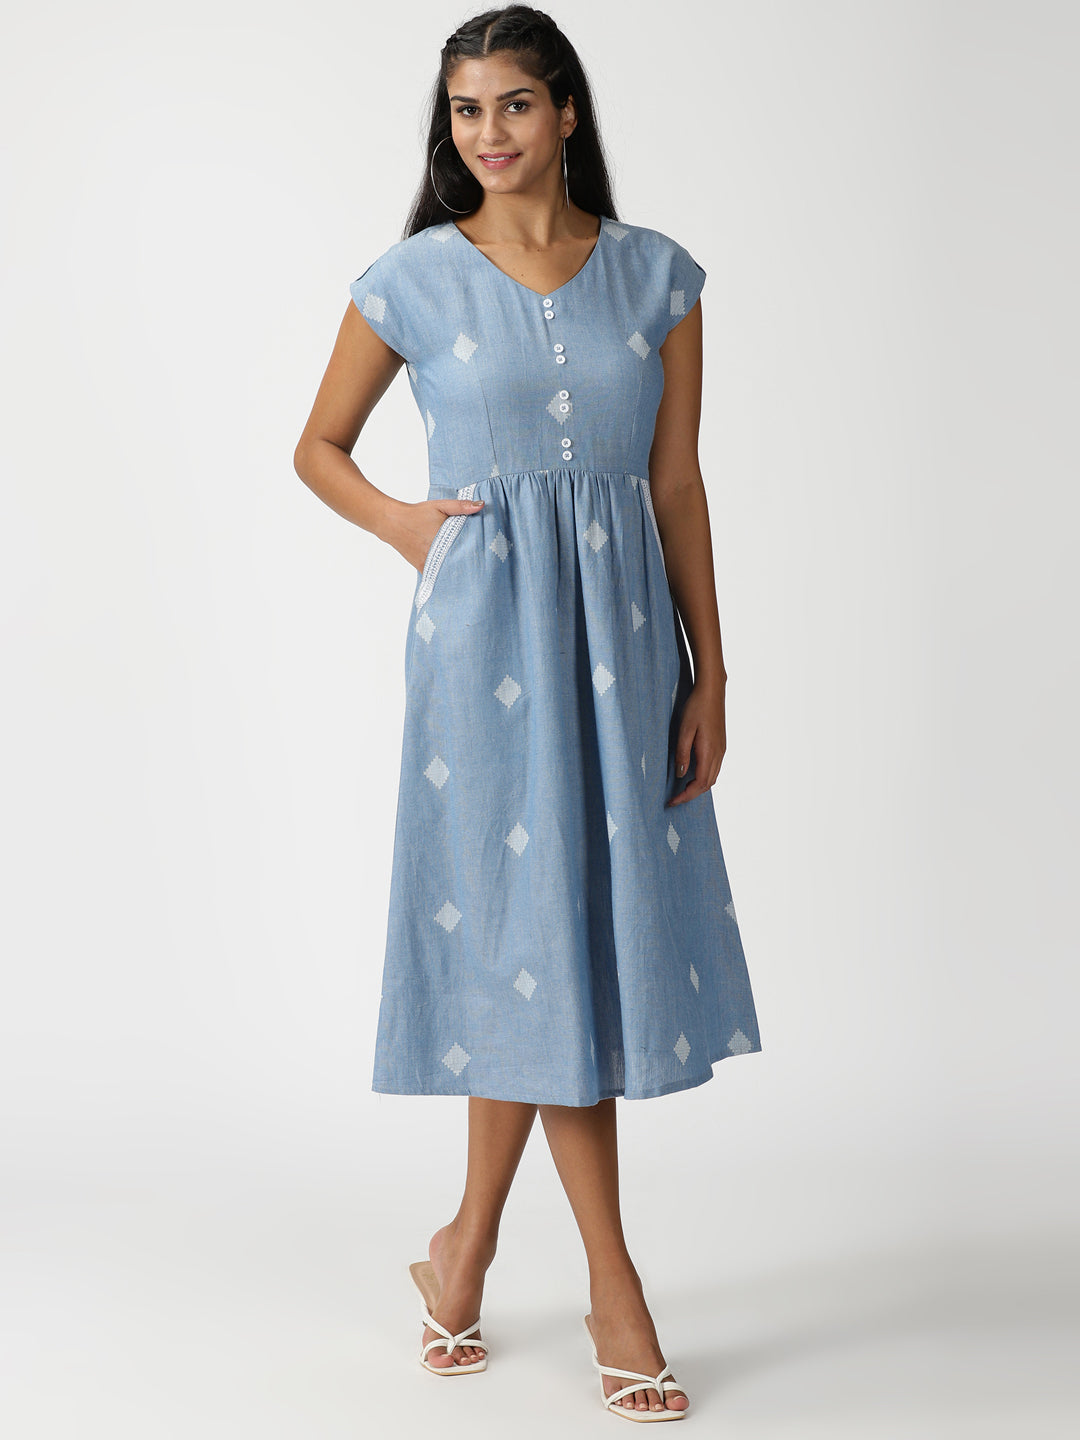 Blue Geometric Woven Design Midi Dress with Embroidered Pockets ...